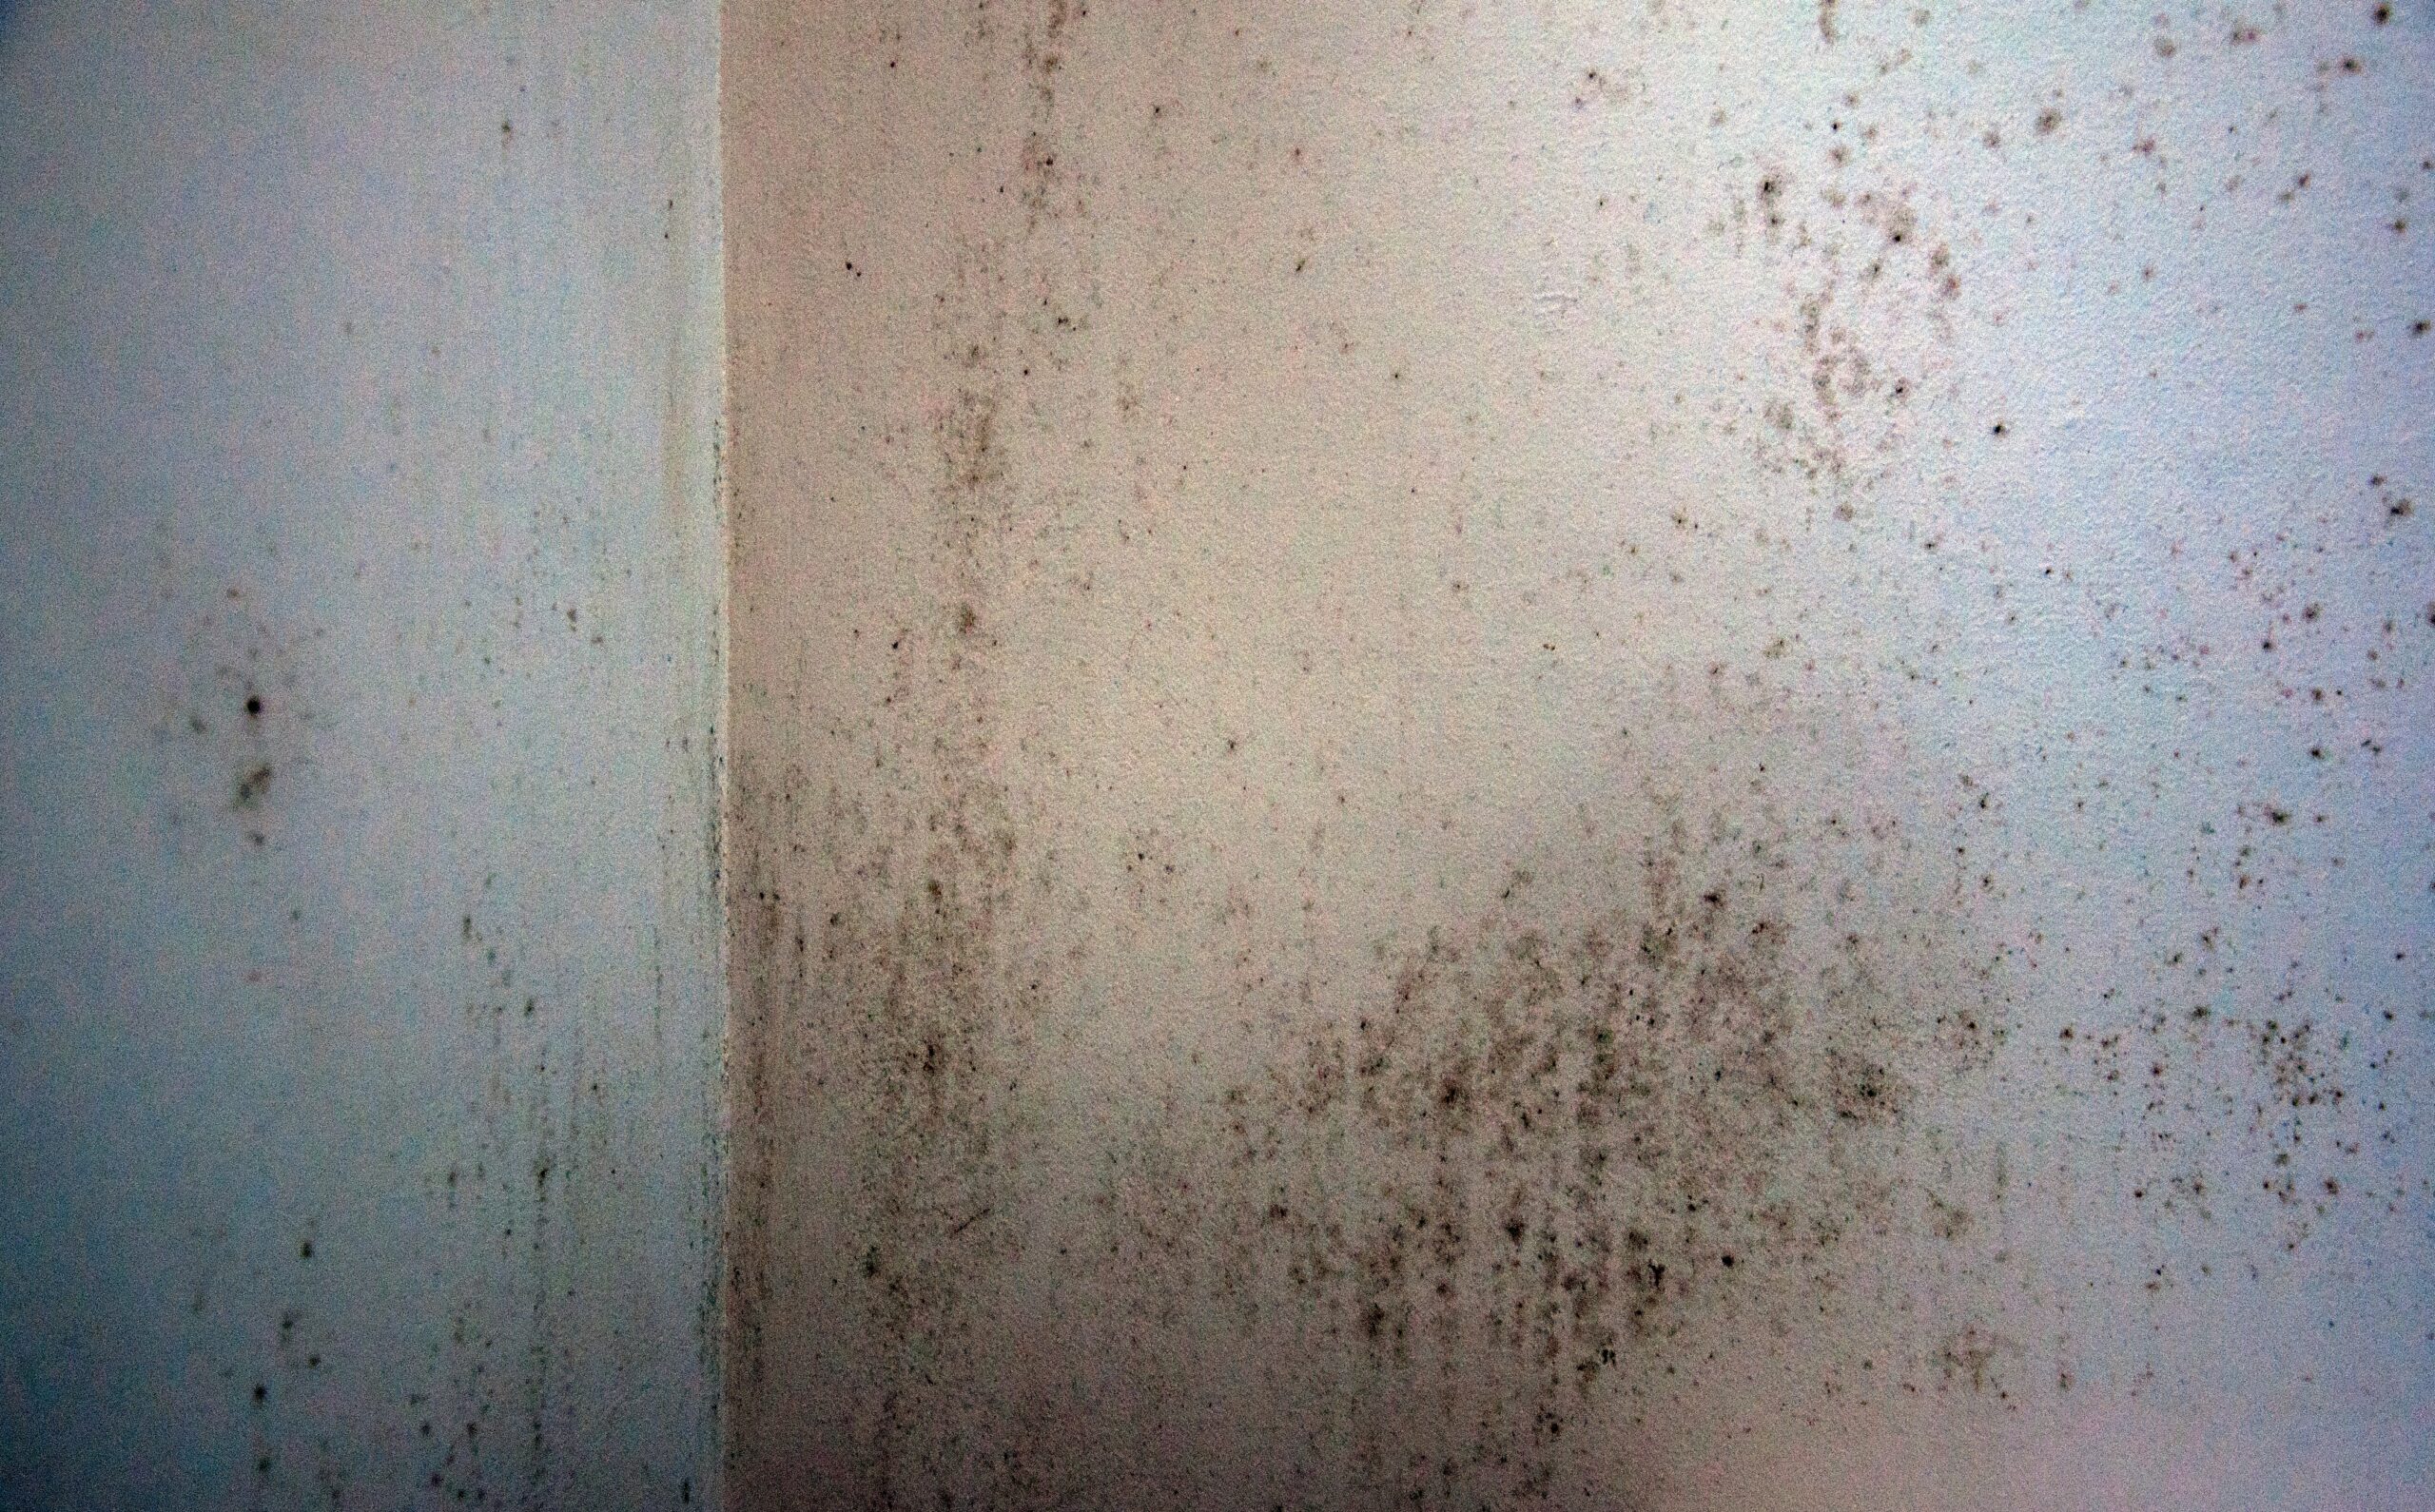 Do Air Purifiers Help with Mold?